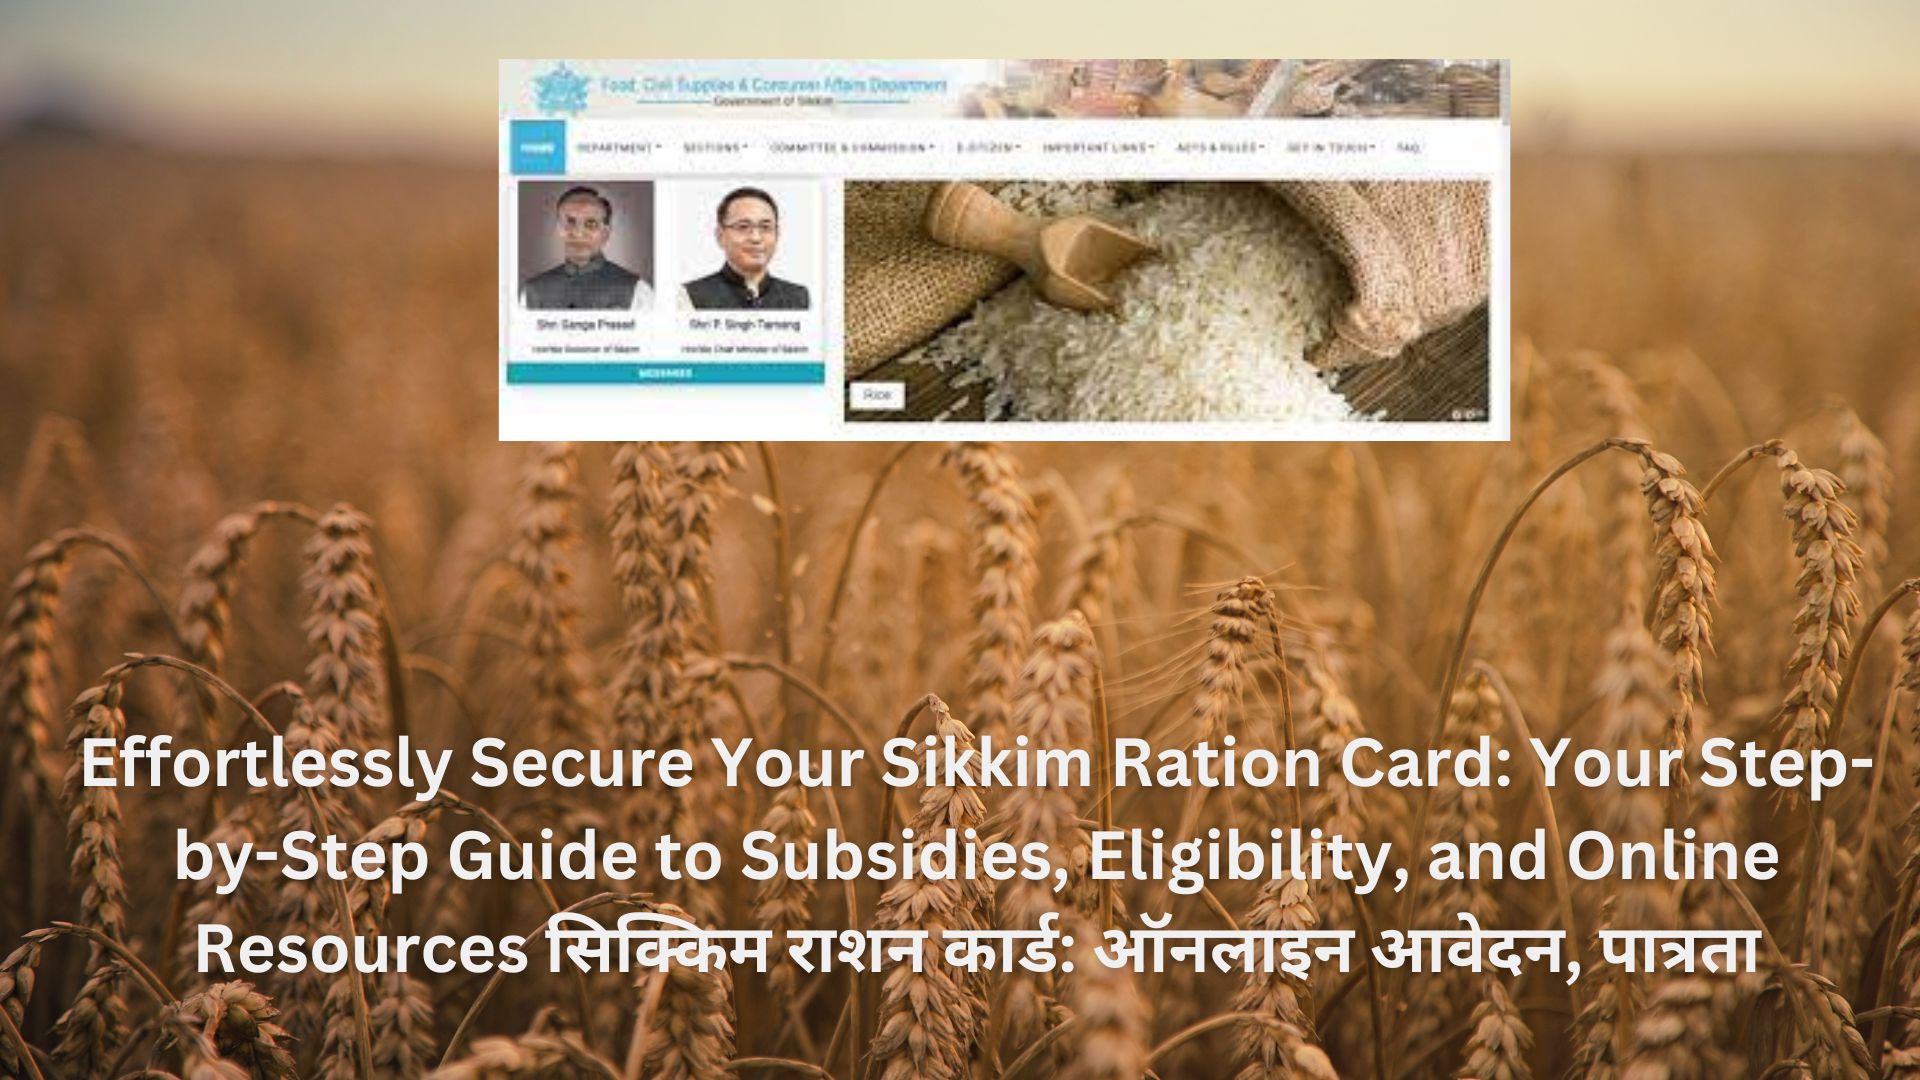 Effortlessly Secure Your Sikkim Ration Card: Your Step-by-Step Guide to Subsidies, Eligibility, and Online Resources सिक्किम राशन कार्ड: ऑनलाइन आवेदन, पात्रता